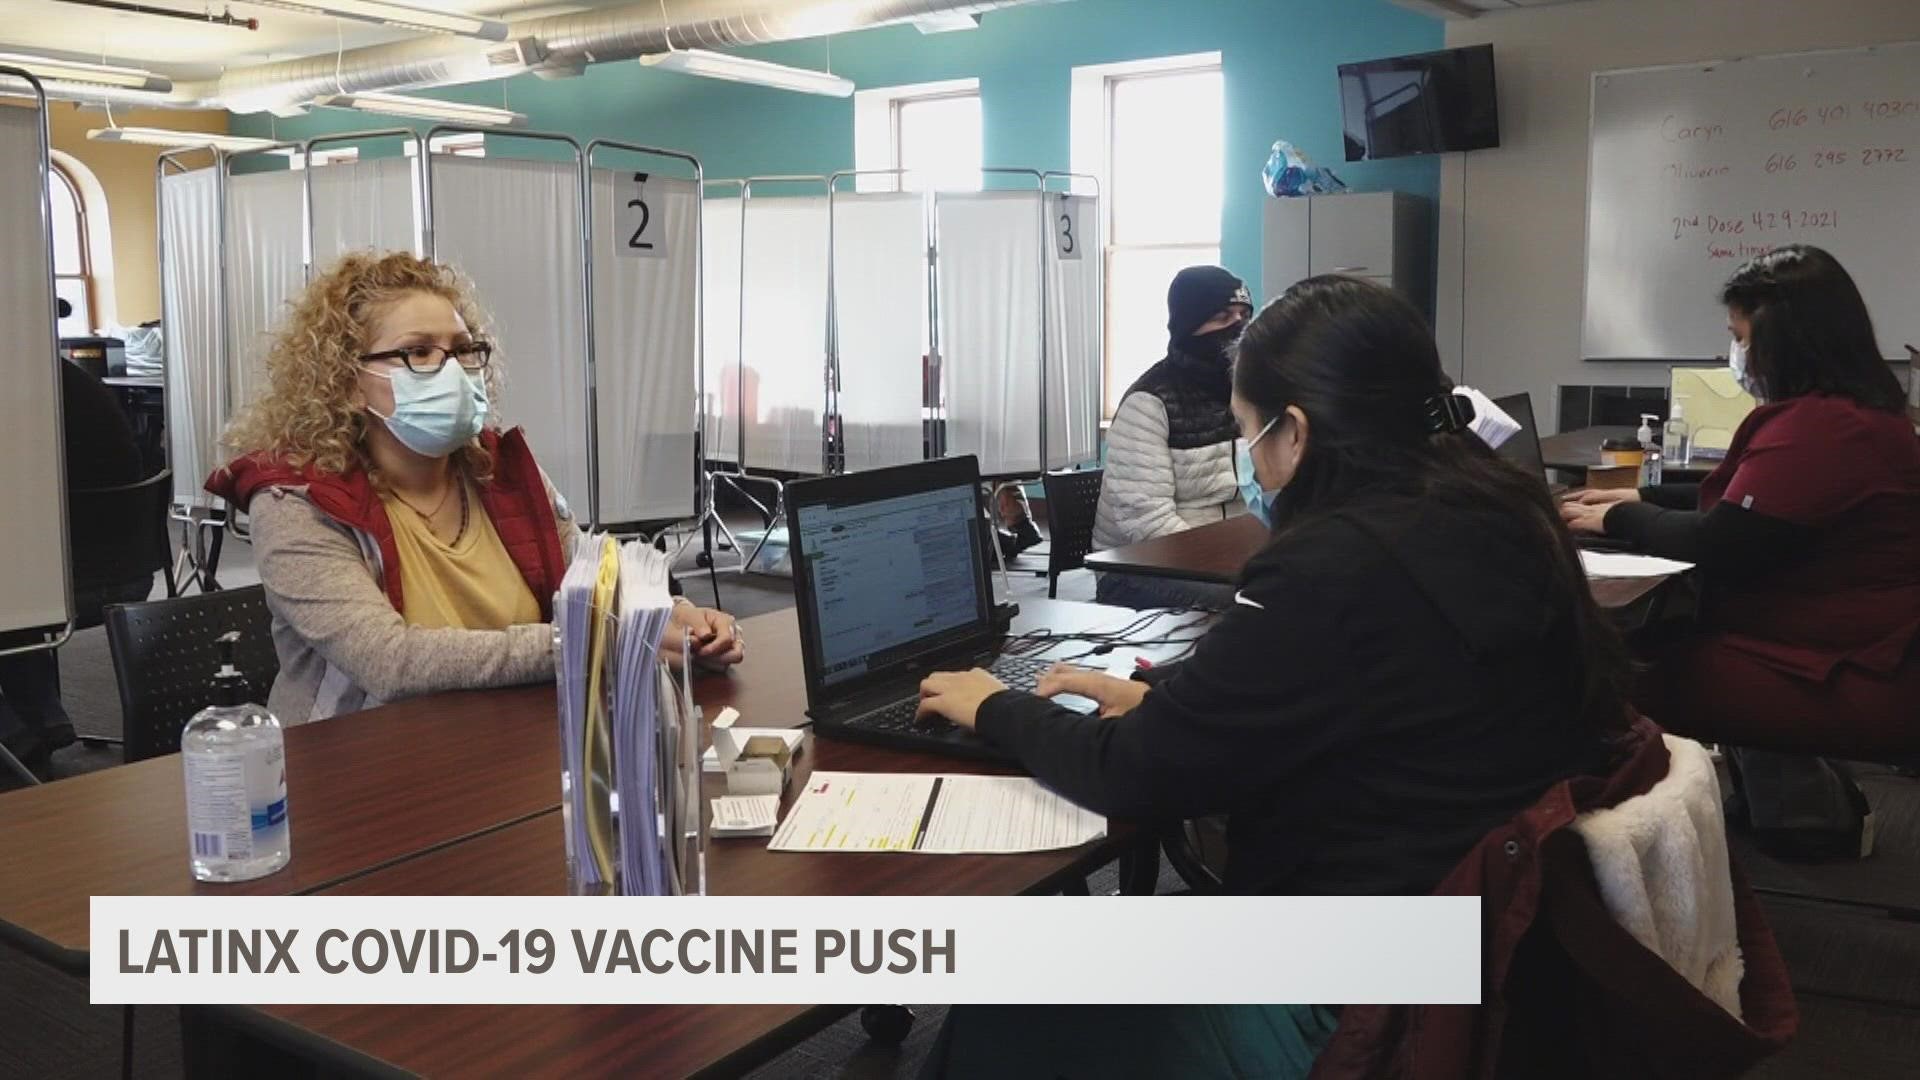 Organization officials say the goal is to get 70% of West Michigan's Hispanic community fully vaccinated by July.